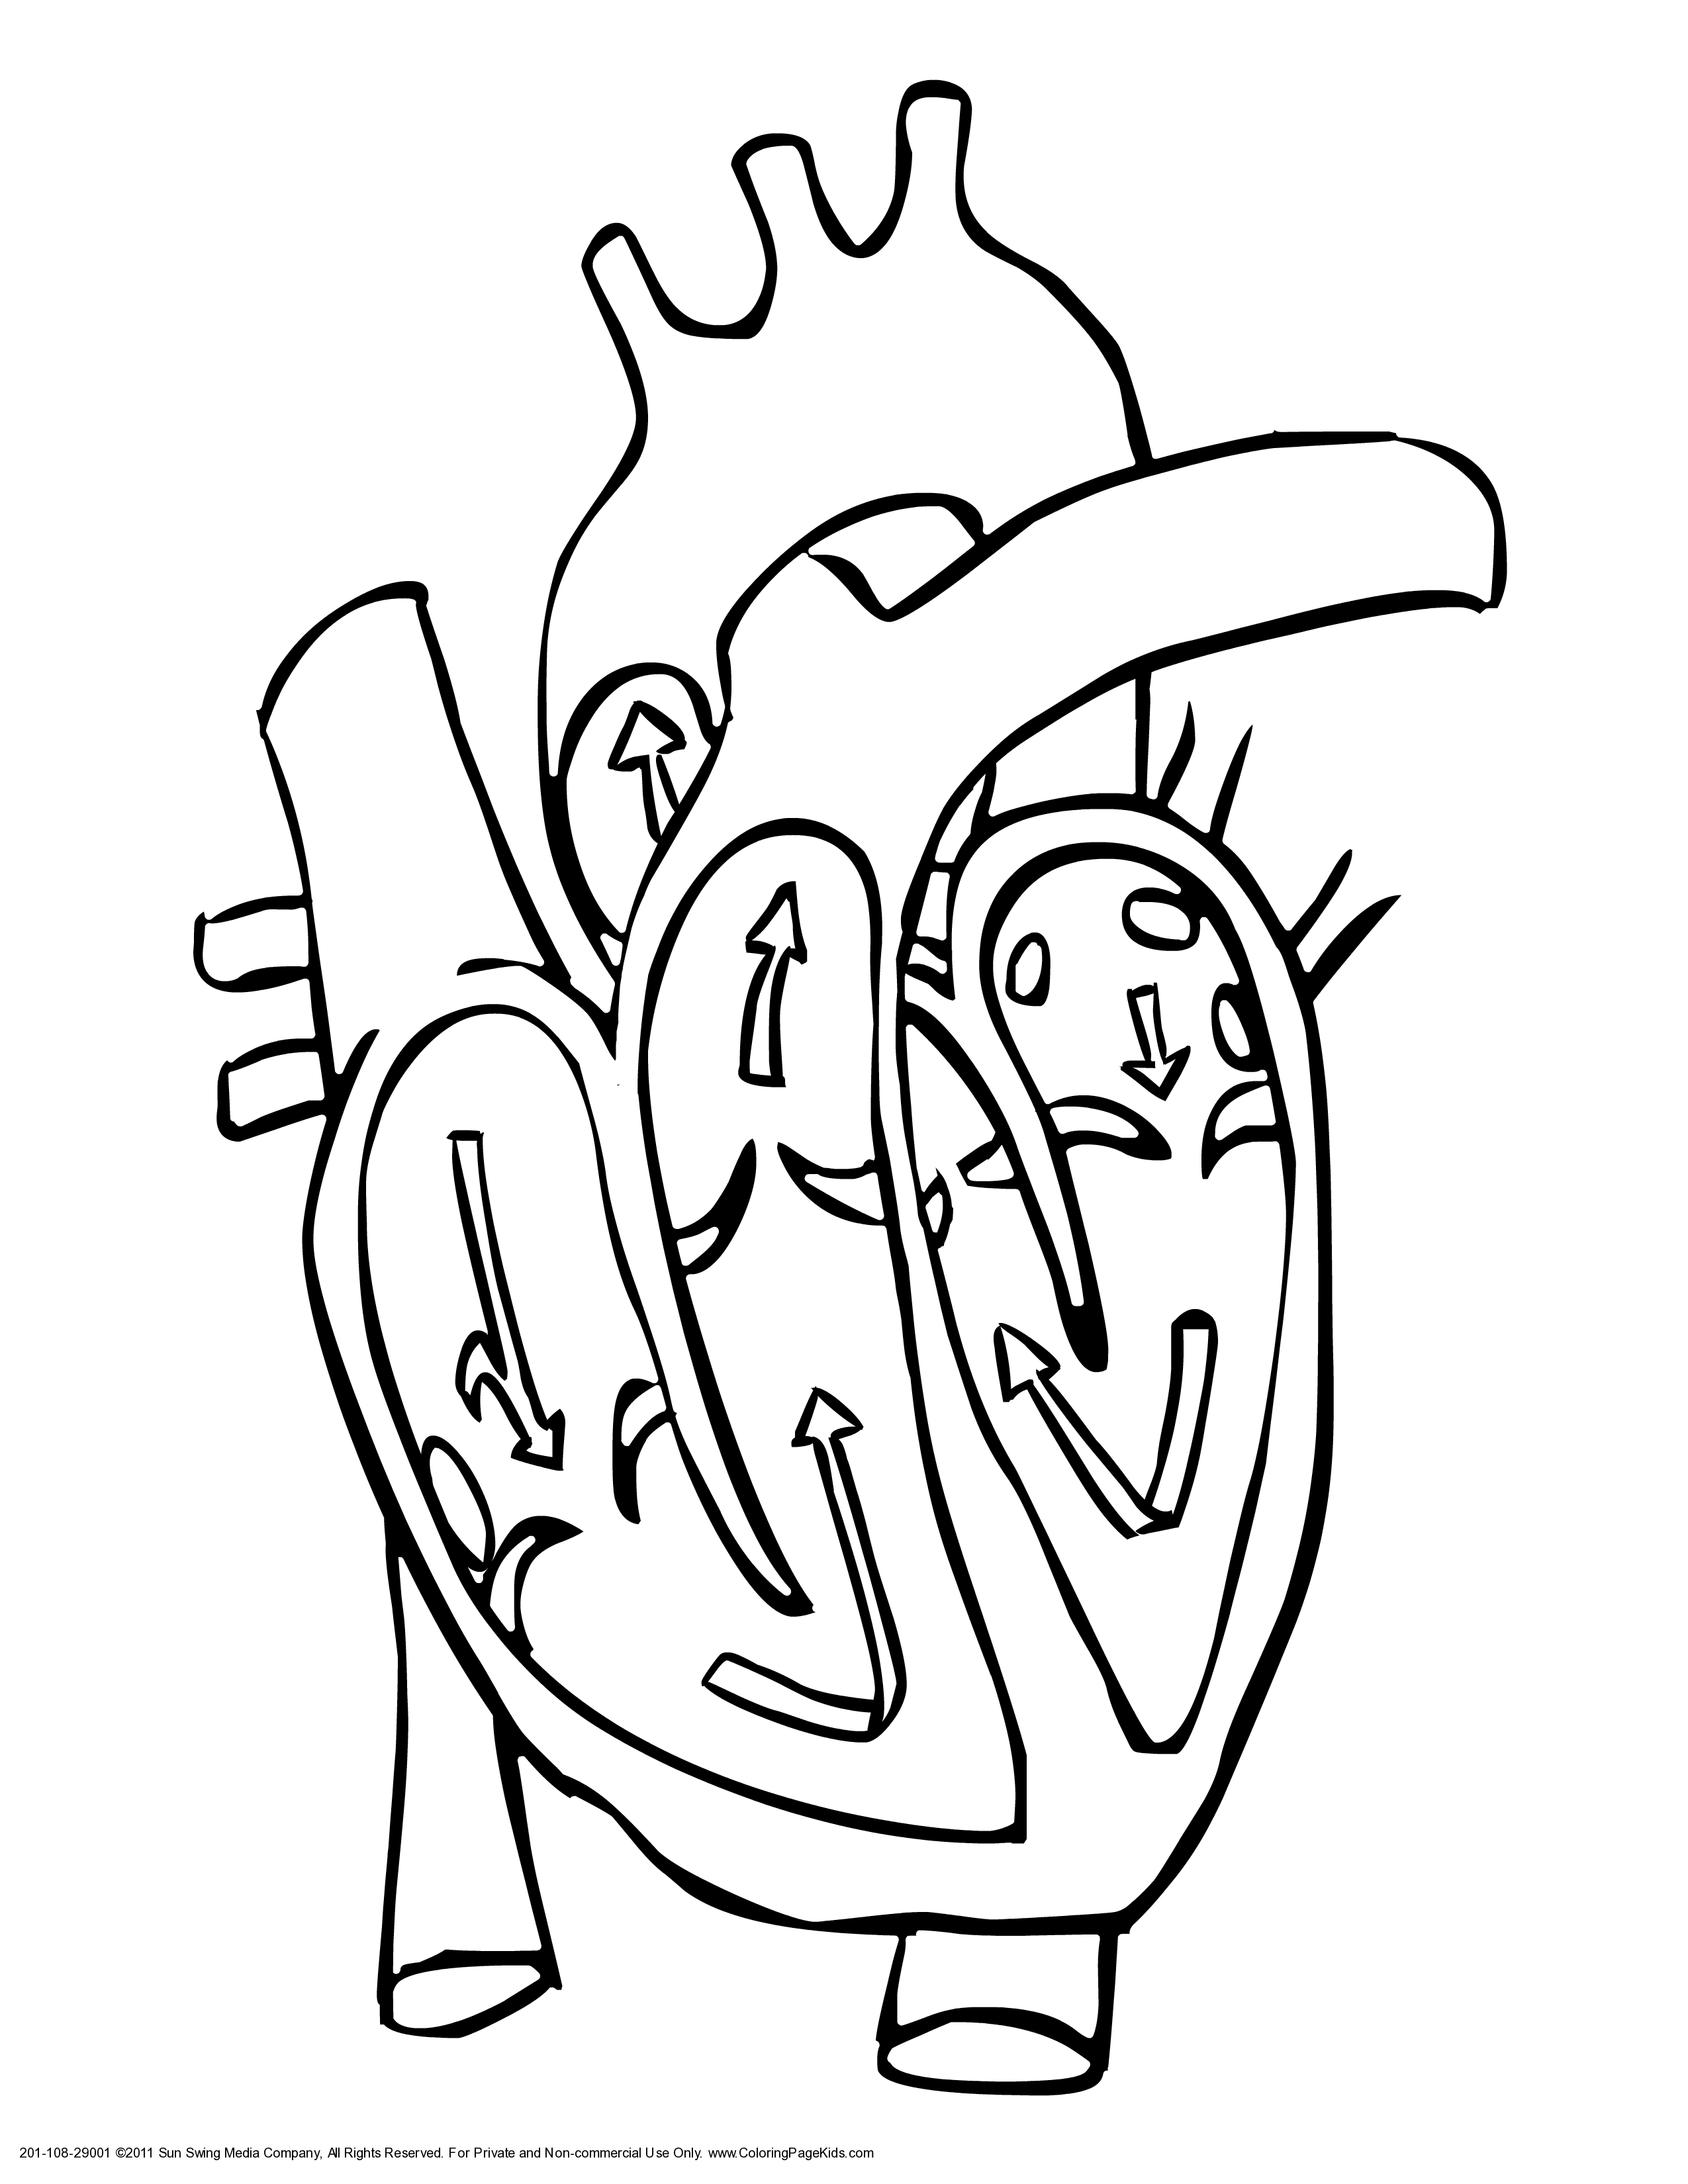 Circulatory System Coloring Page - AZ Coloring Pages